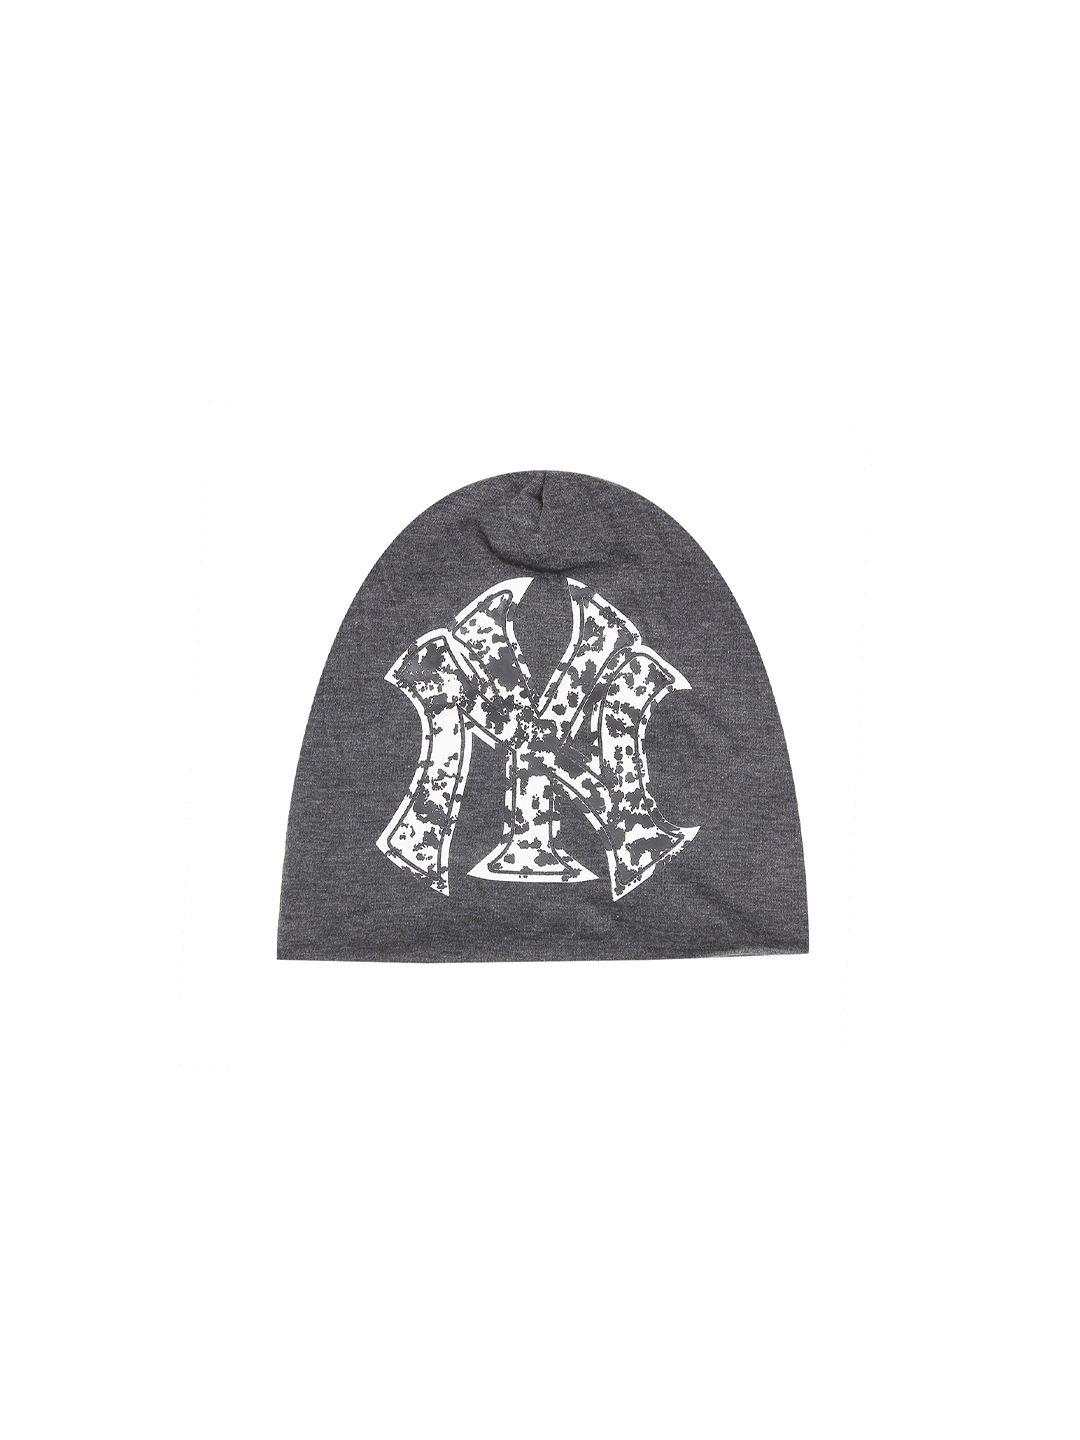 isweven grey & white printed beanie